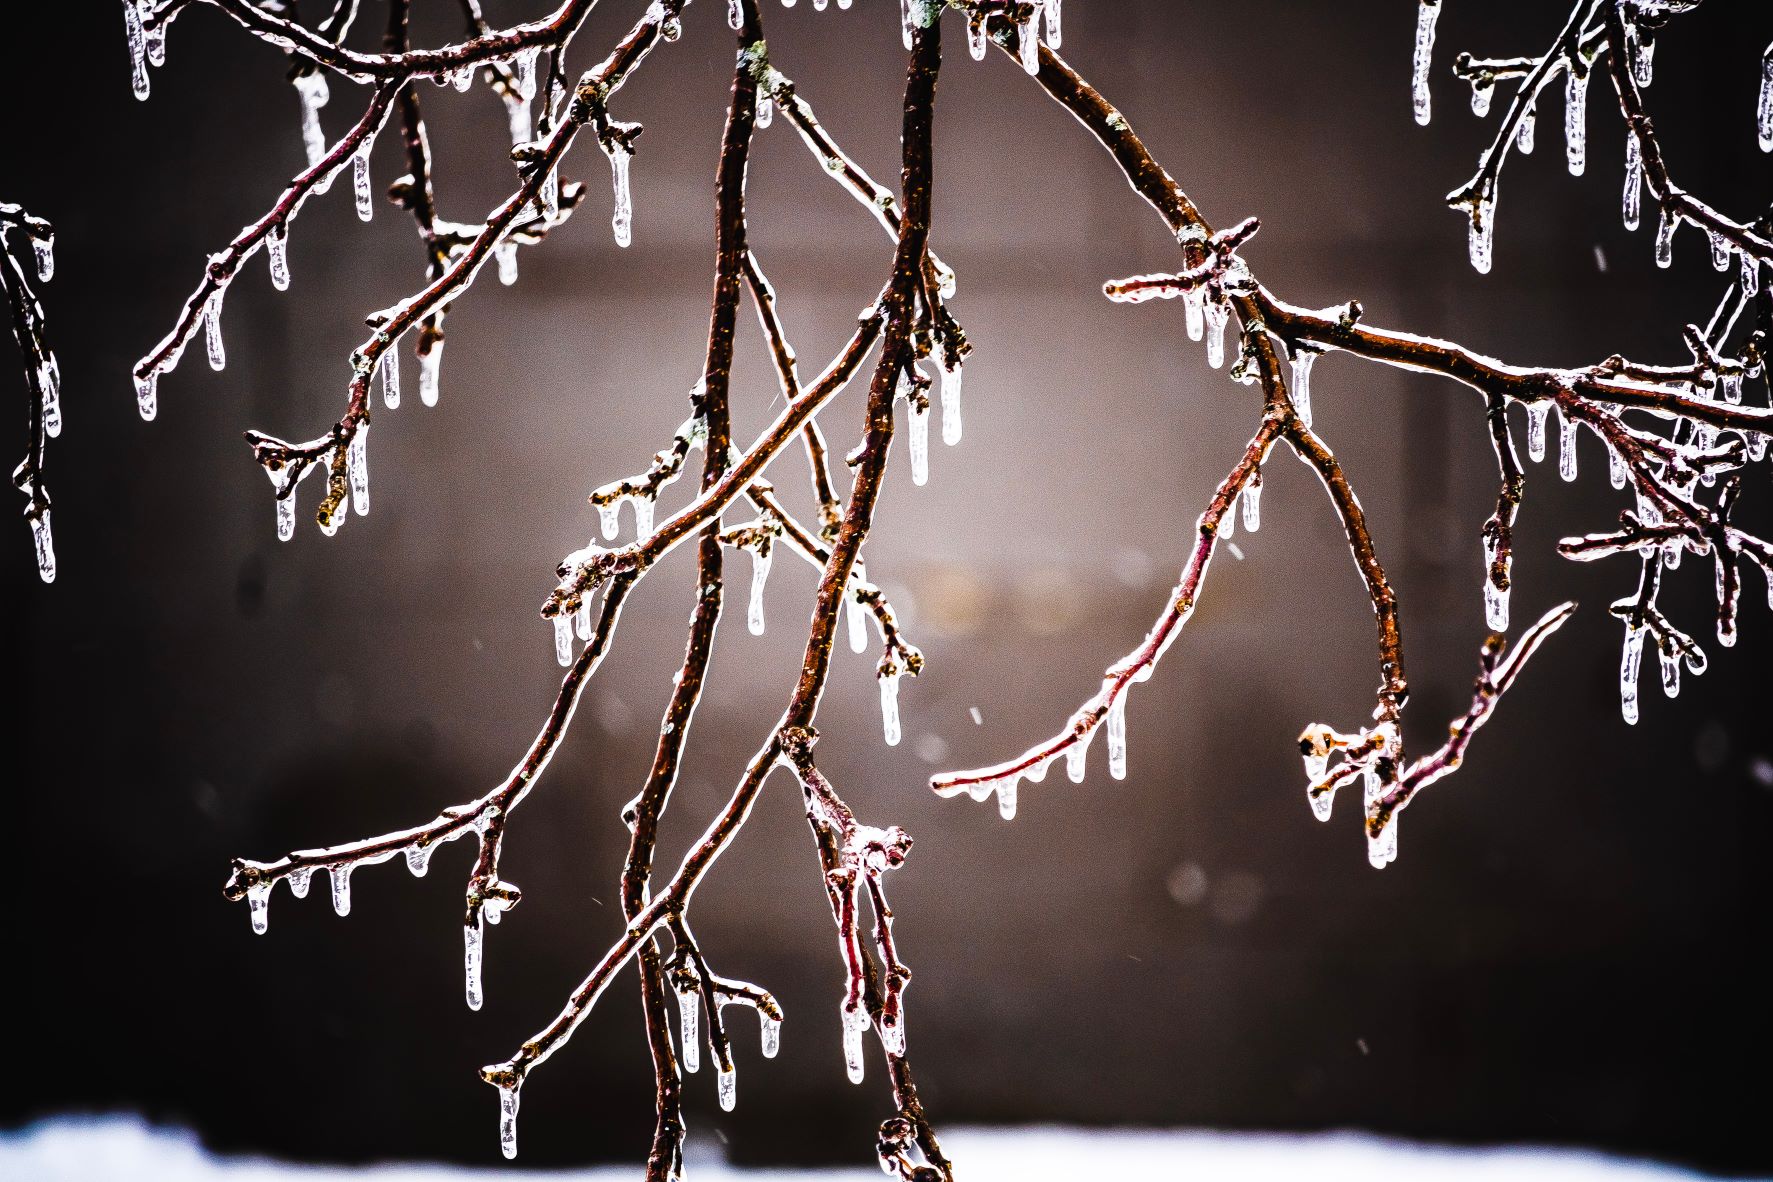 Image of a iced up tree branch.